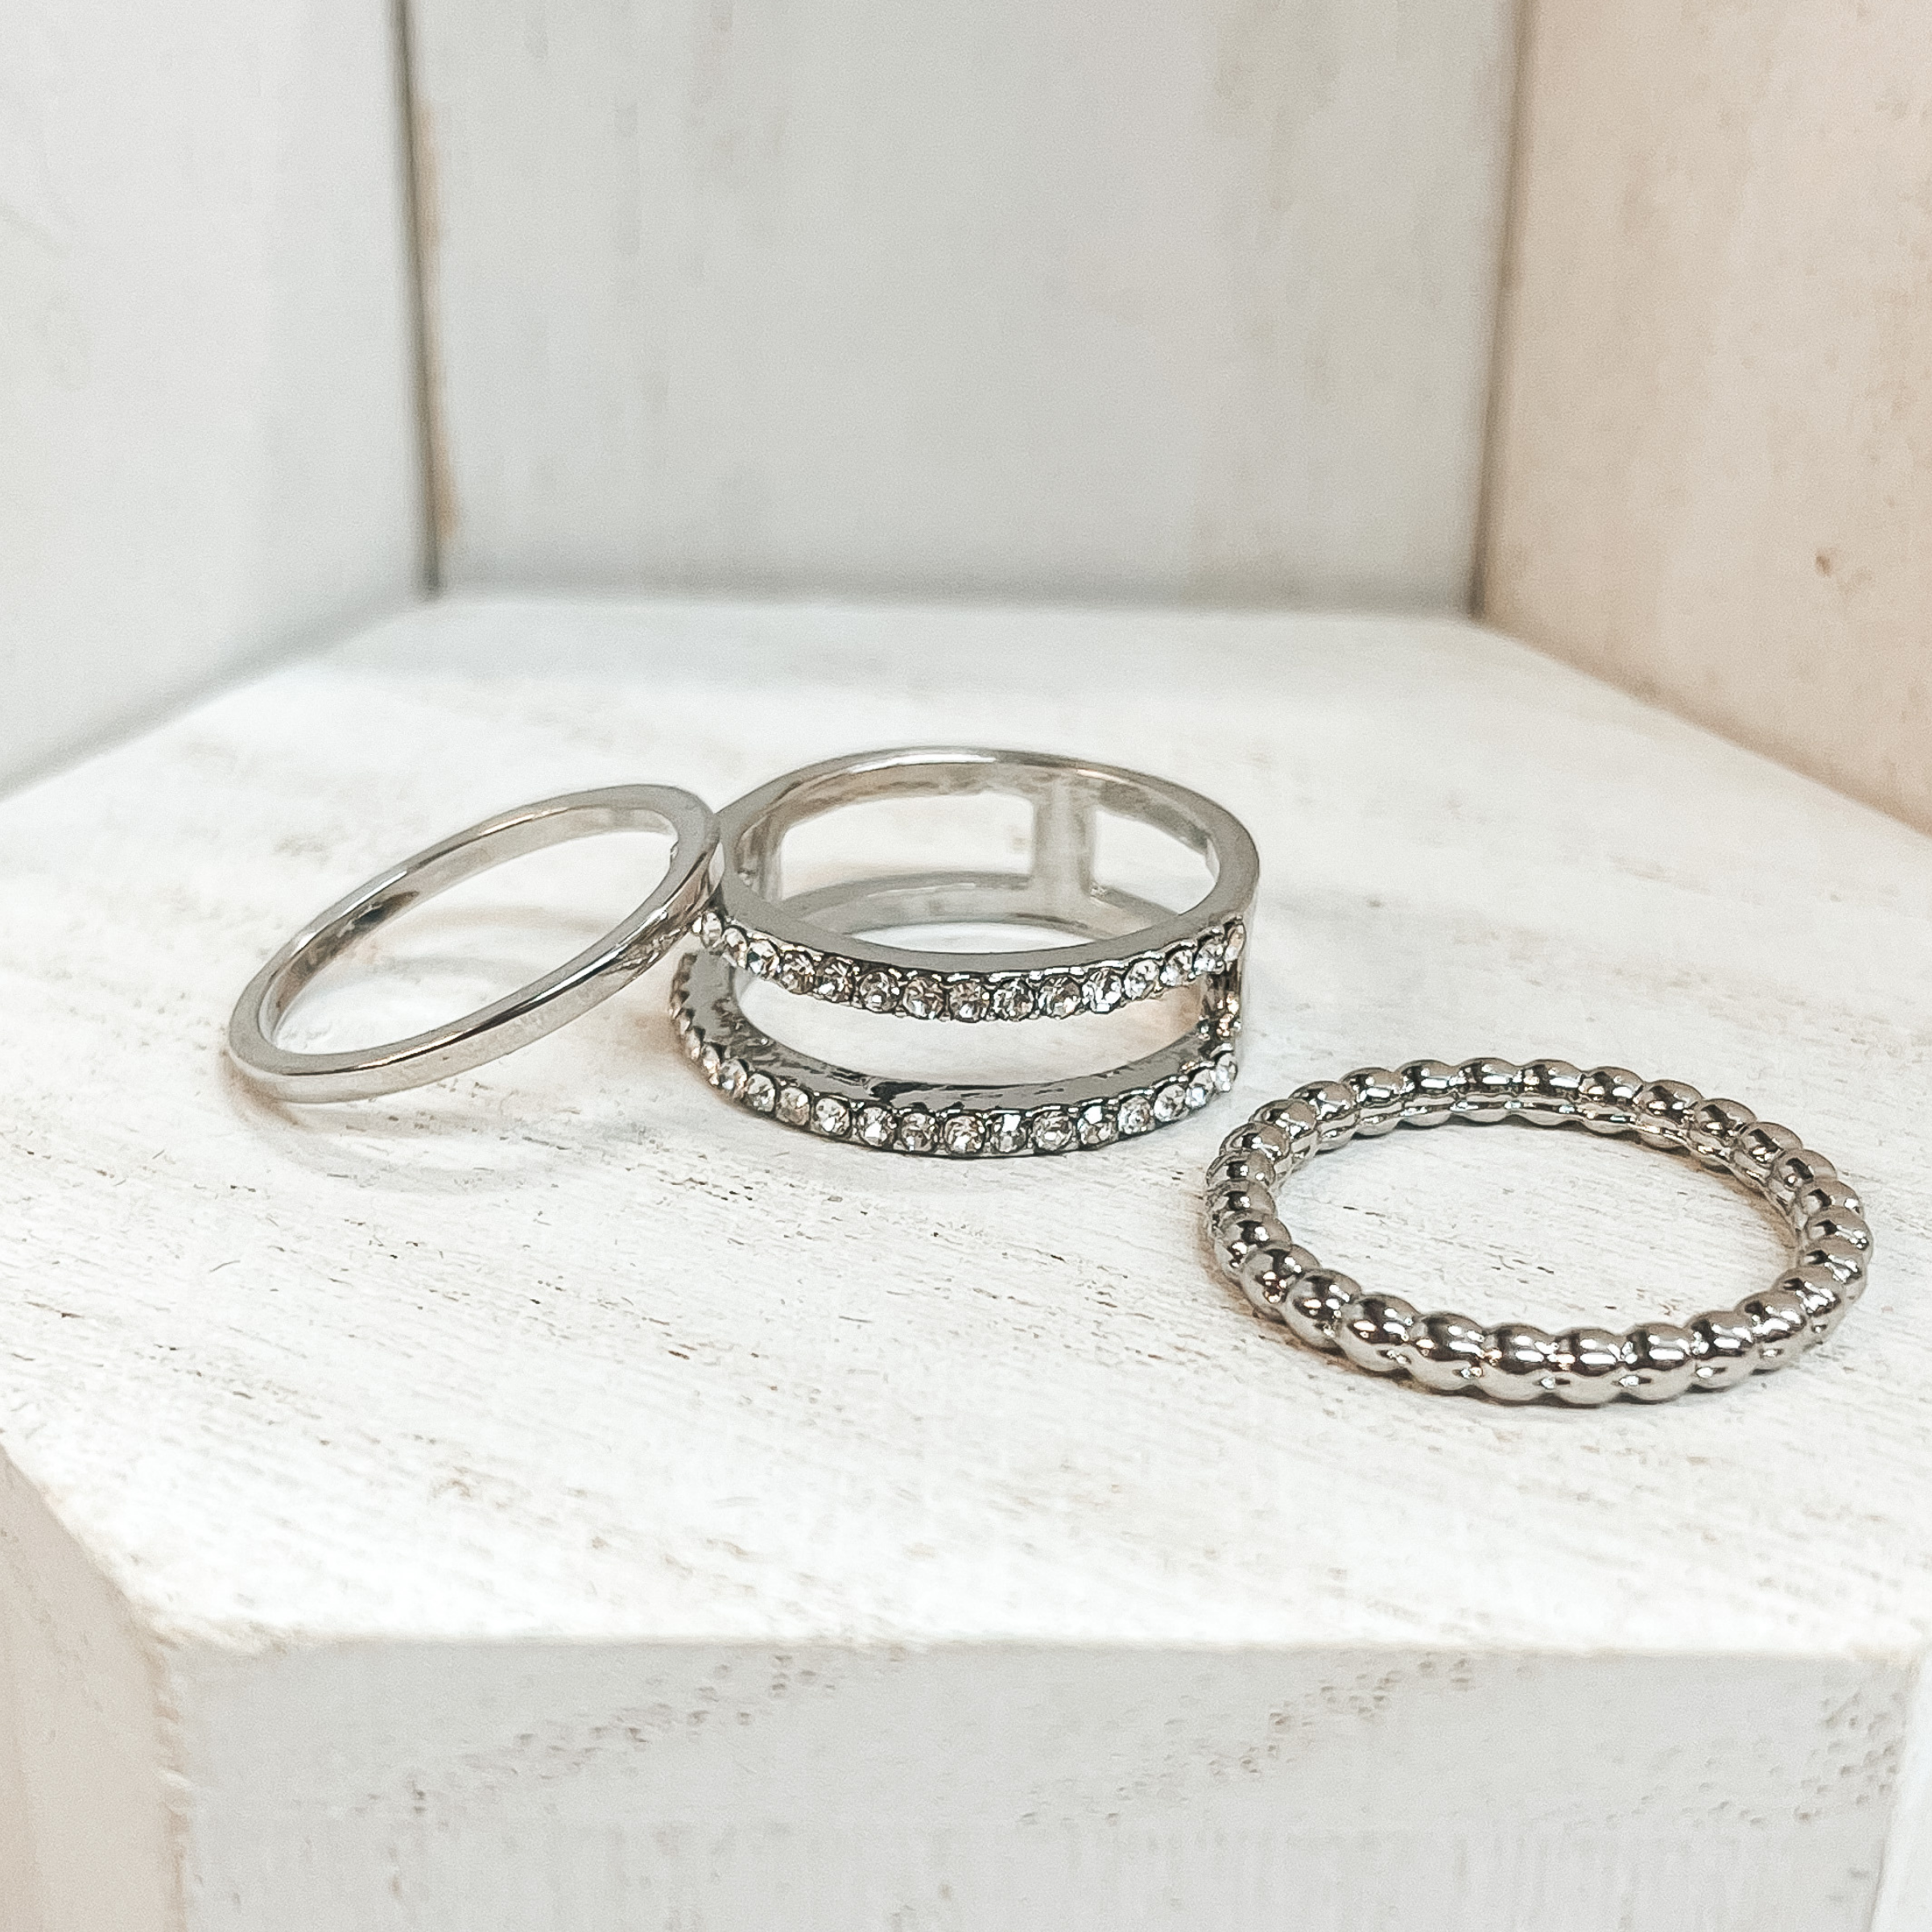 Set of 5 | Multi Textured Ring Set in Silver Tone with Clear CZ Crystals - Giddy Up Glamour Boutique